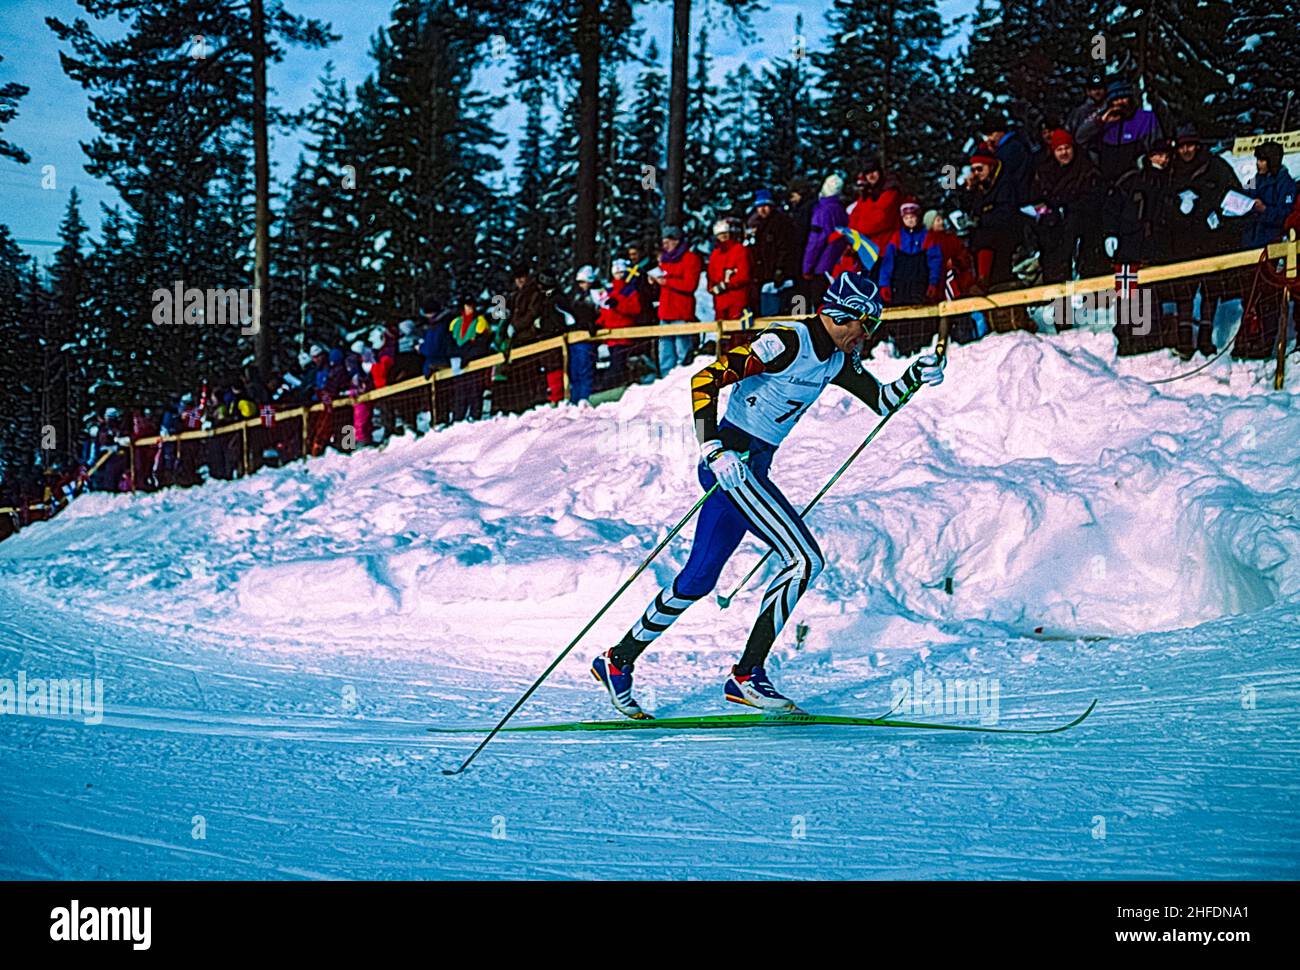 Mikhail Botvinov (RUS) competing in the men's 10km cross country skiing at the 1994 Olympic Winter Games. Stock Photo